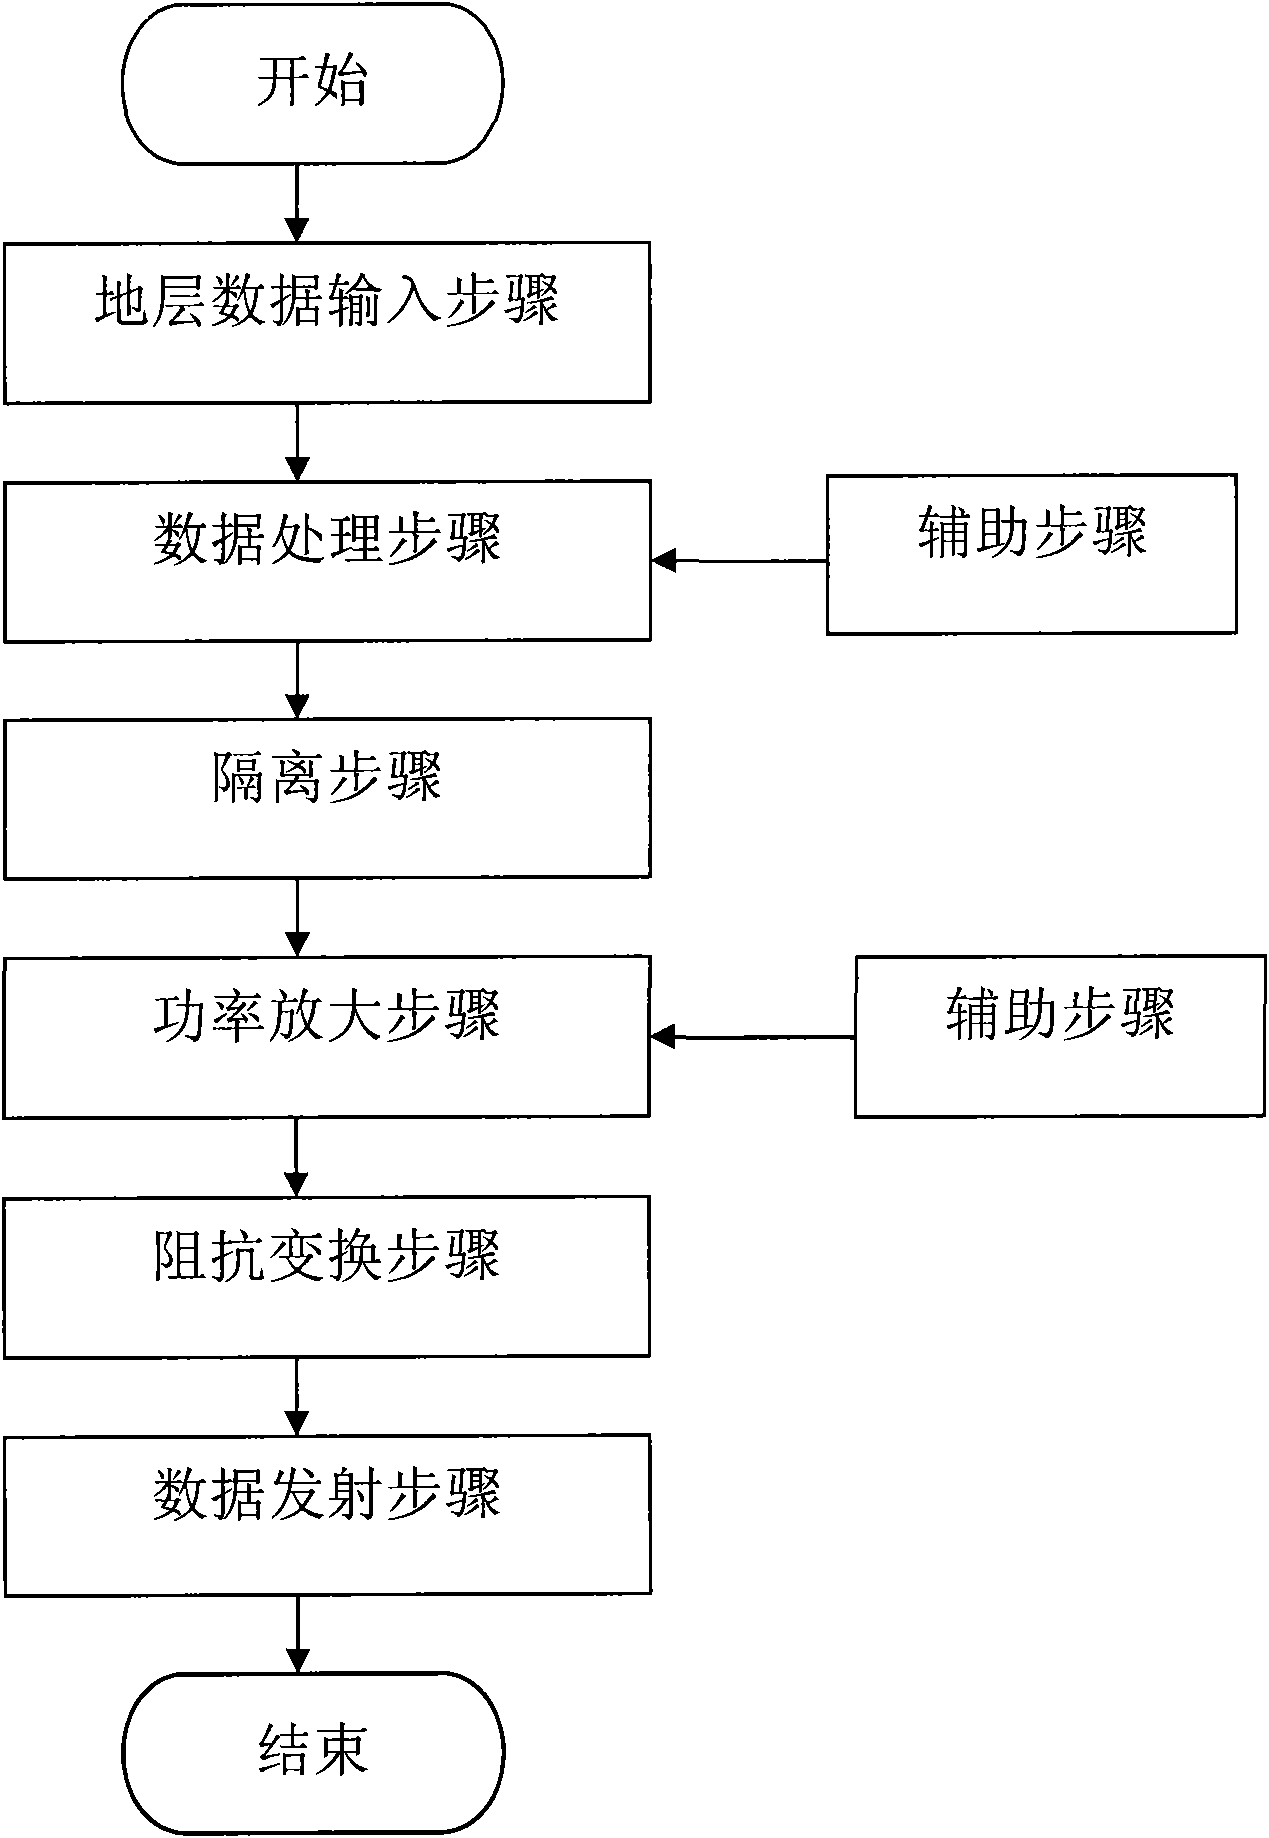 Downhole signal transmitting device for electromagnetic measurement while drilling system and transmitting method thereof